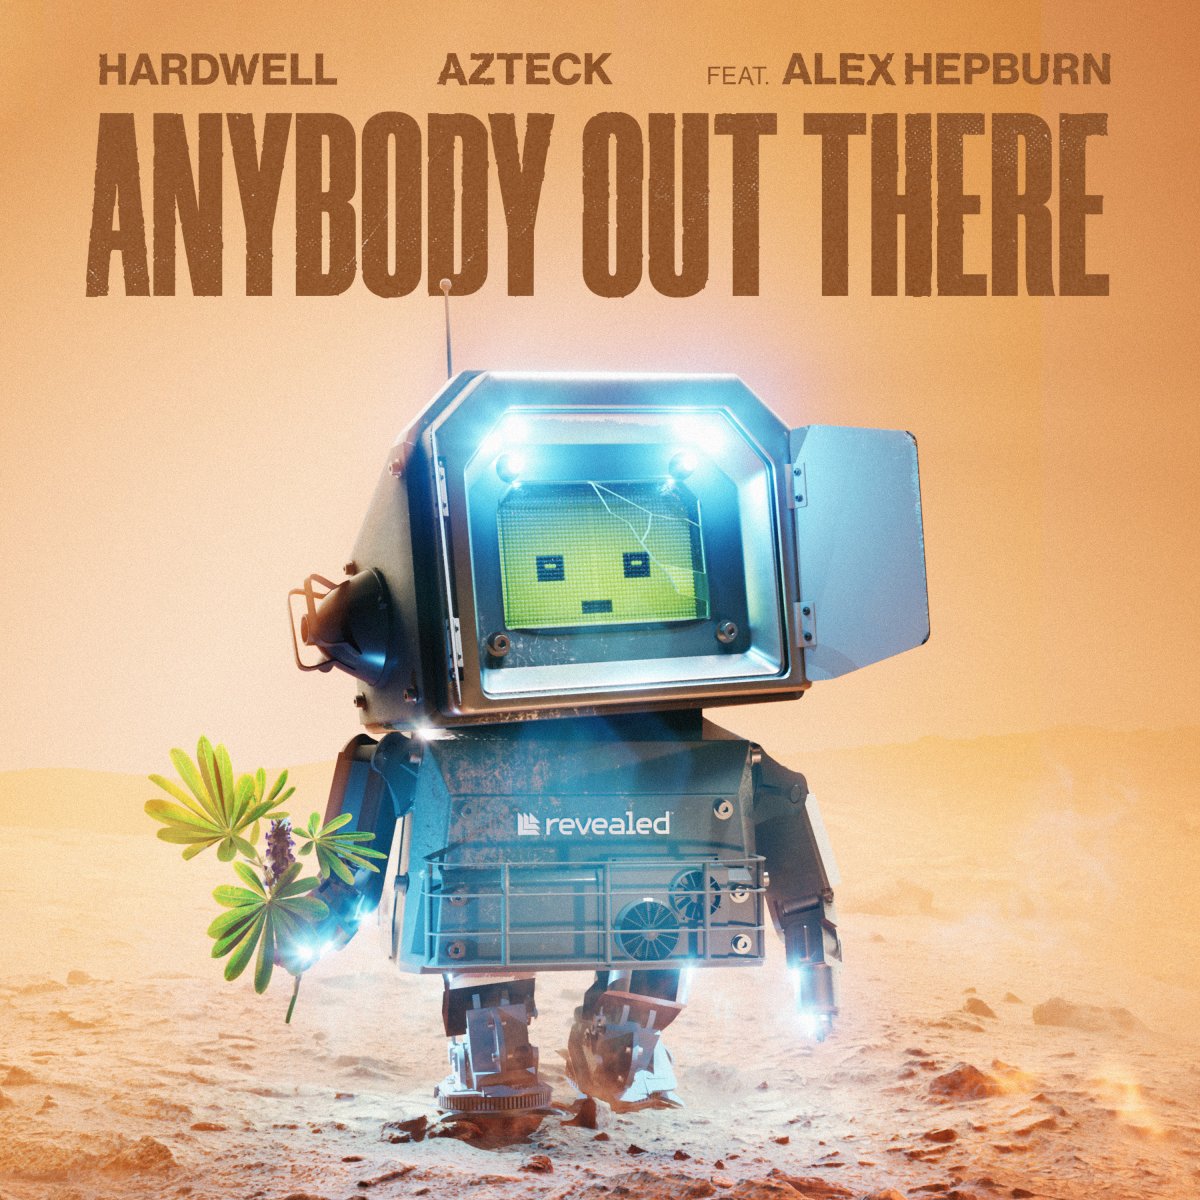 Anybody Out There - Hardwell⁠ & Azteck⁠ feat. Alex Hepburn⁠ 